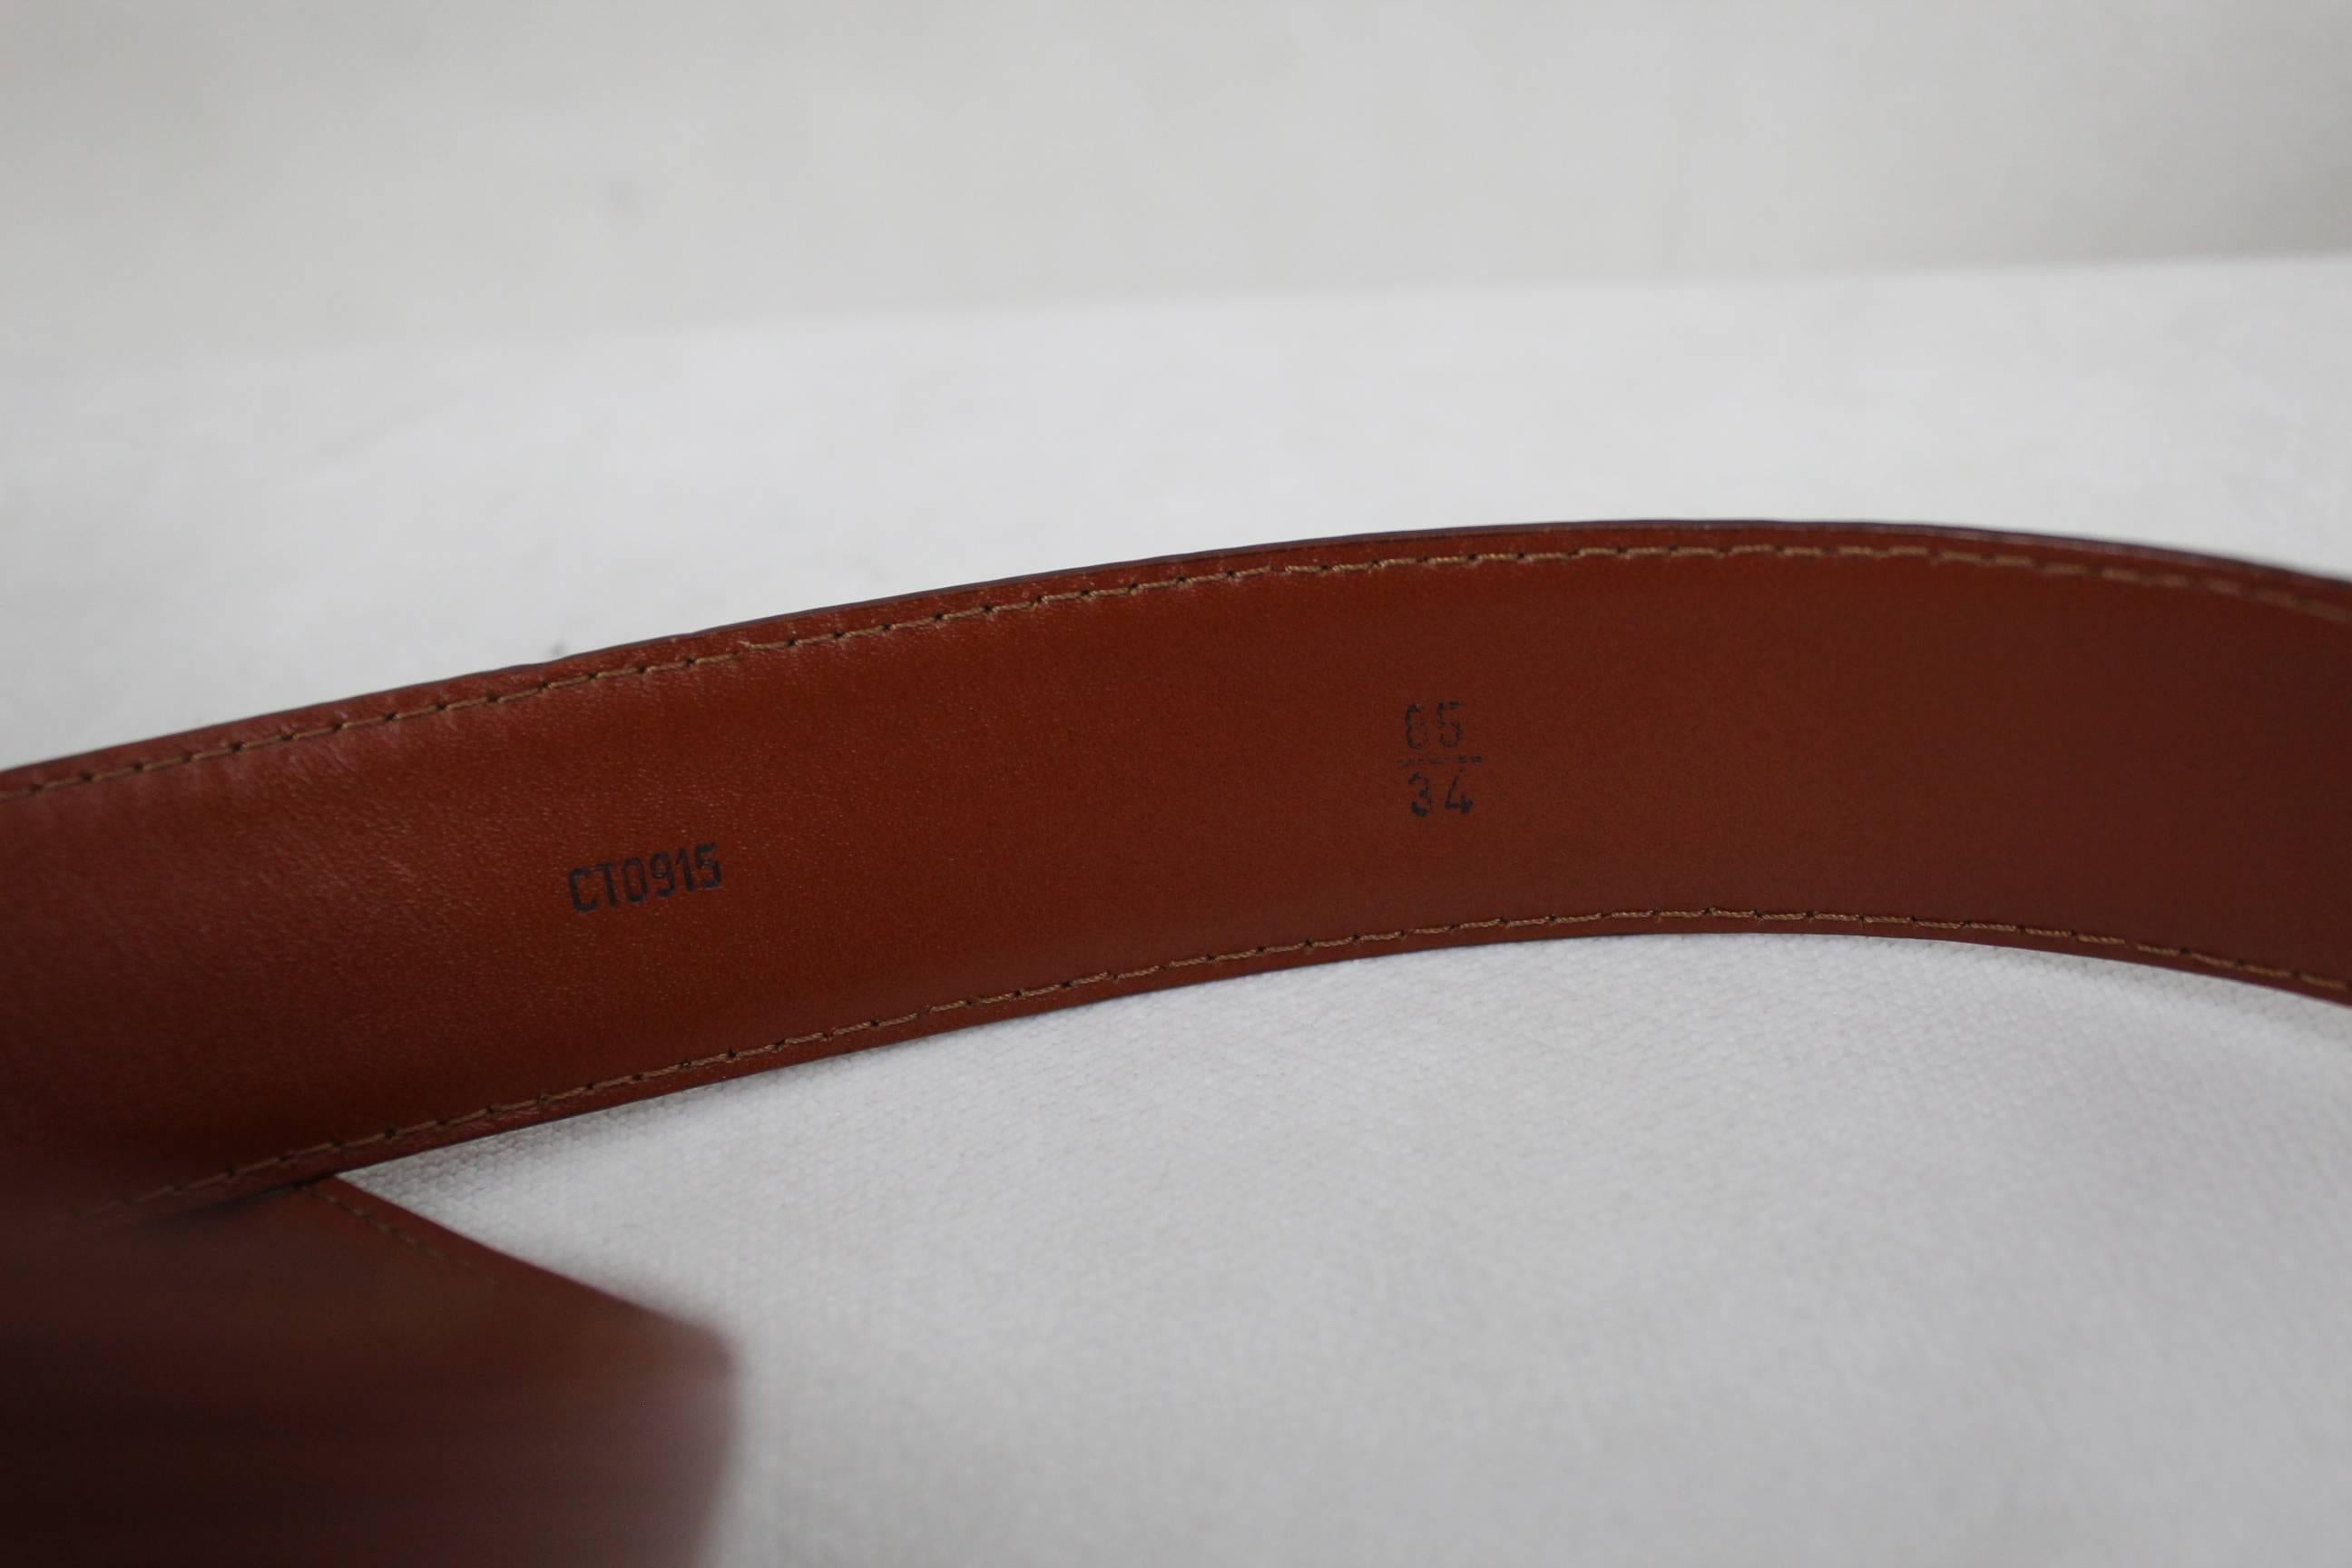 Really nice vintage Belt from Louis Vuitton in brown Epi leather.

Size 85